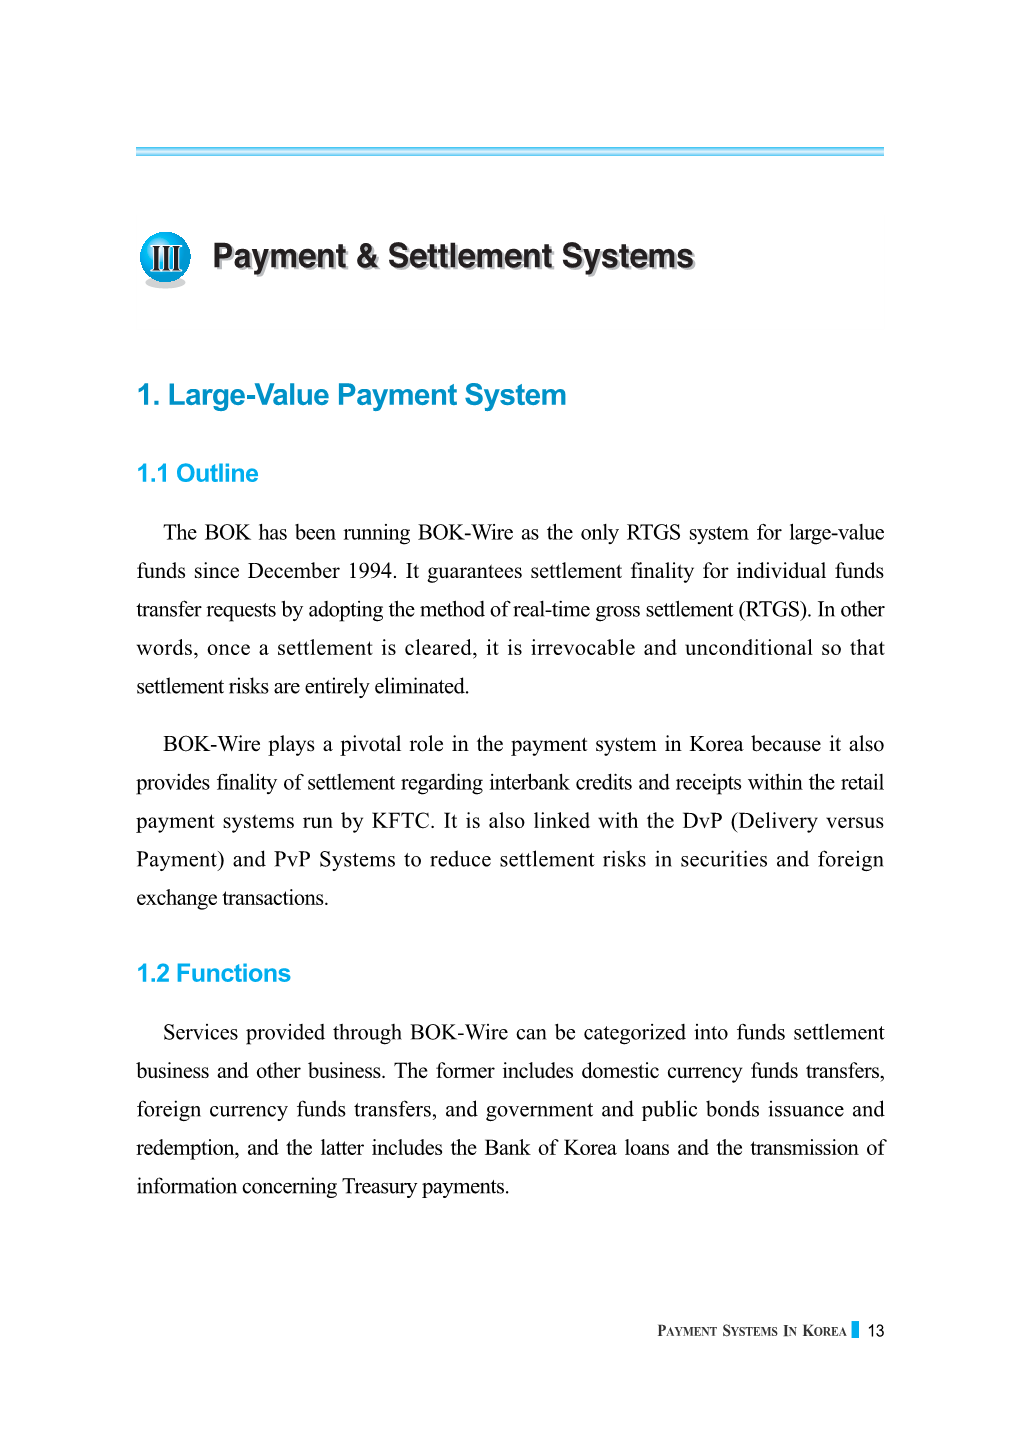 PAYMENT SYSTEMS in KOREA 13 (Domestic Currency Funds Transfer Service)